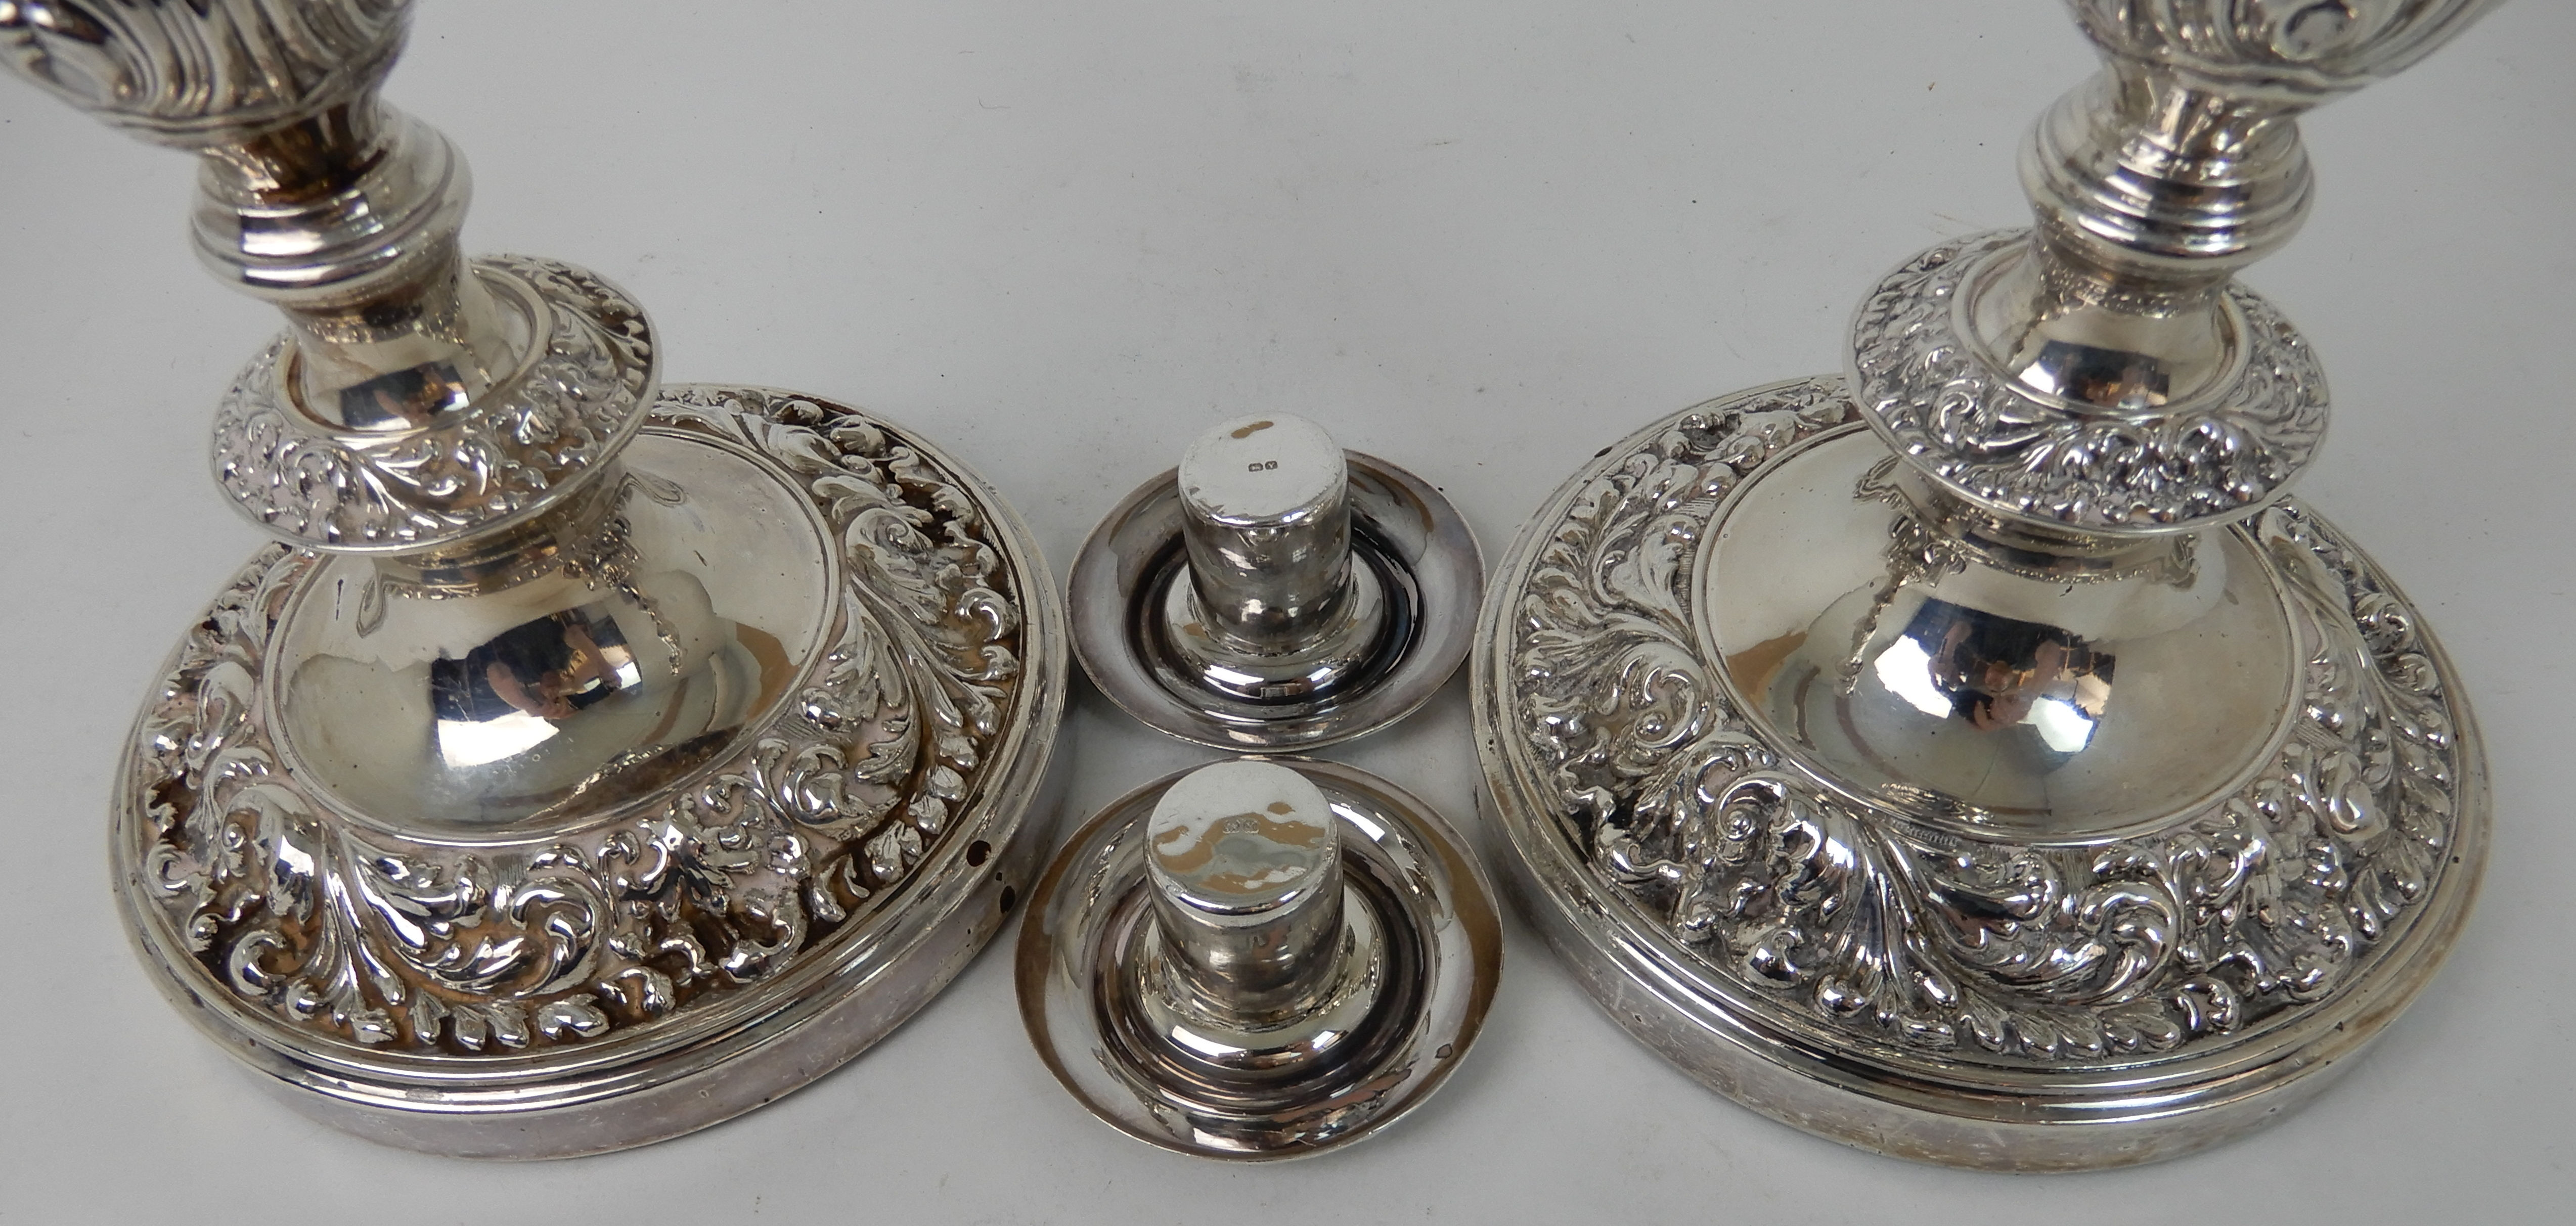 A PAIR OF SILVER CANDLESTICKS maker's mark BLD Birmingham 1948, the removable drip pans on - Image 5 of 5